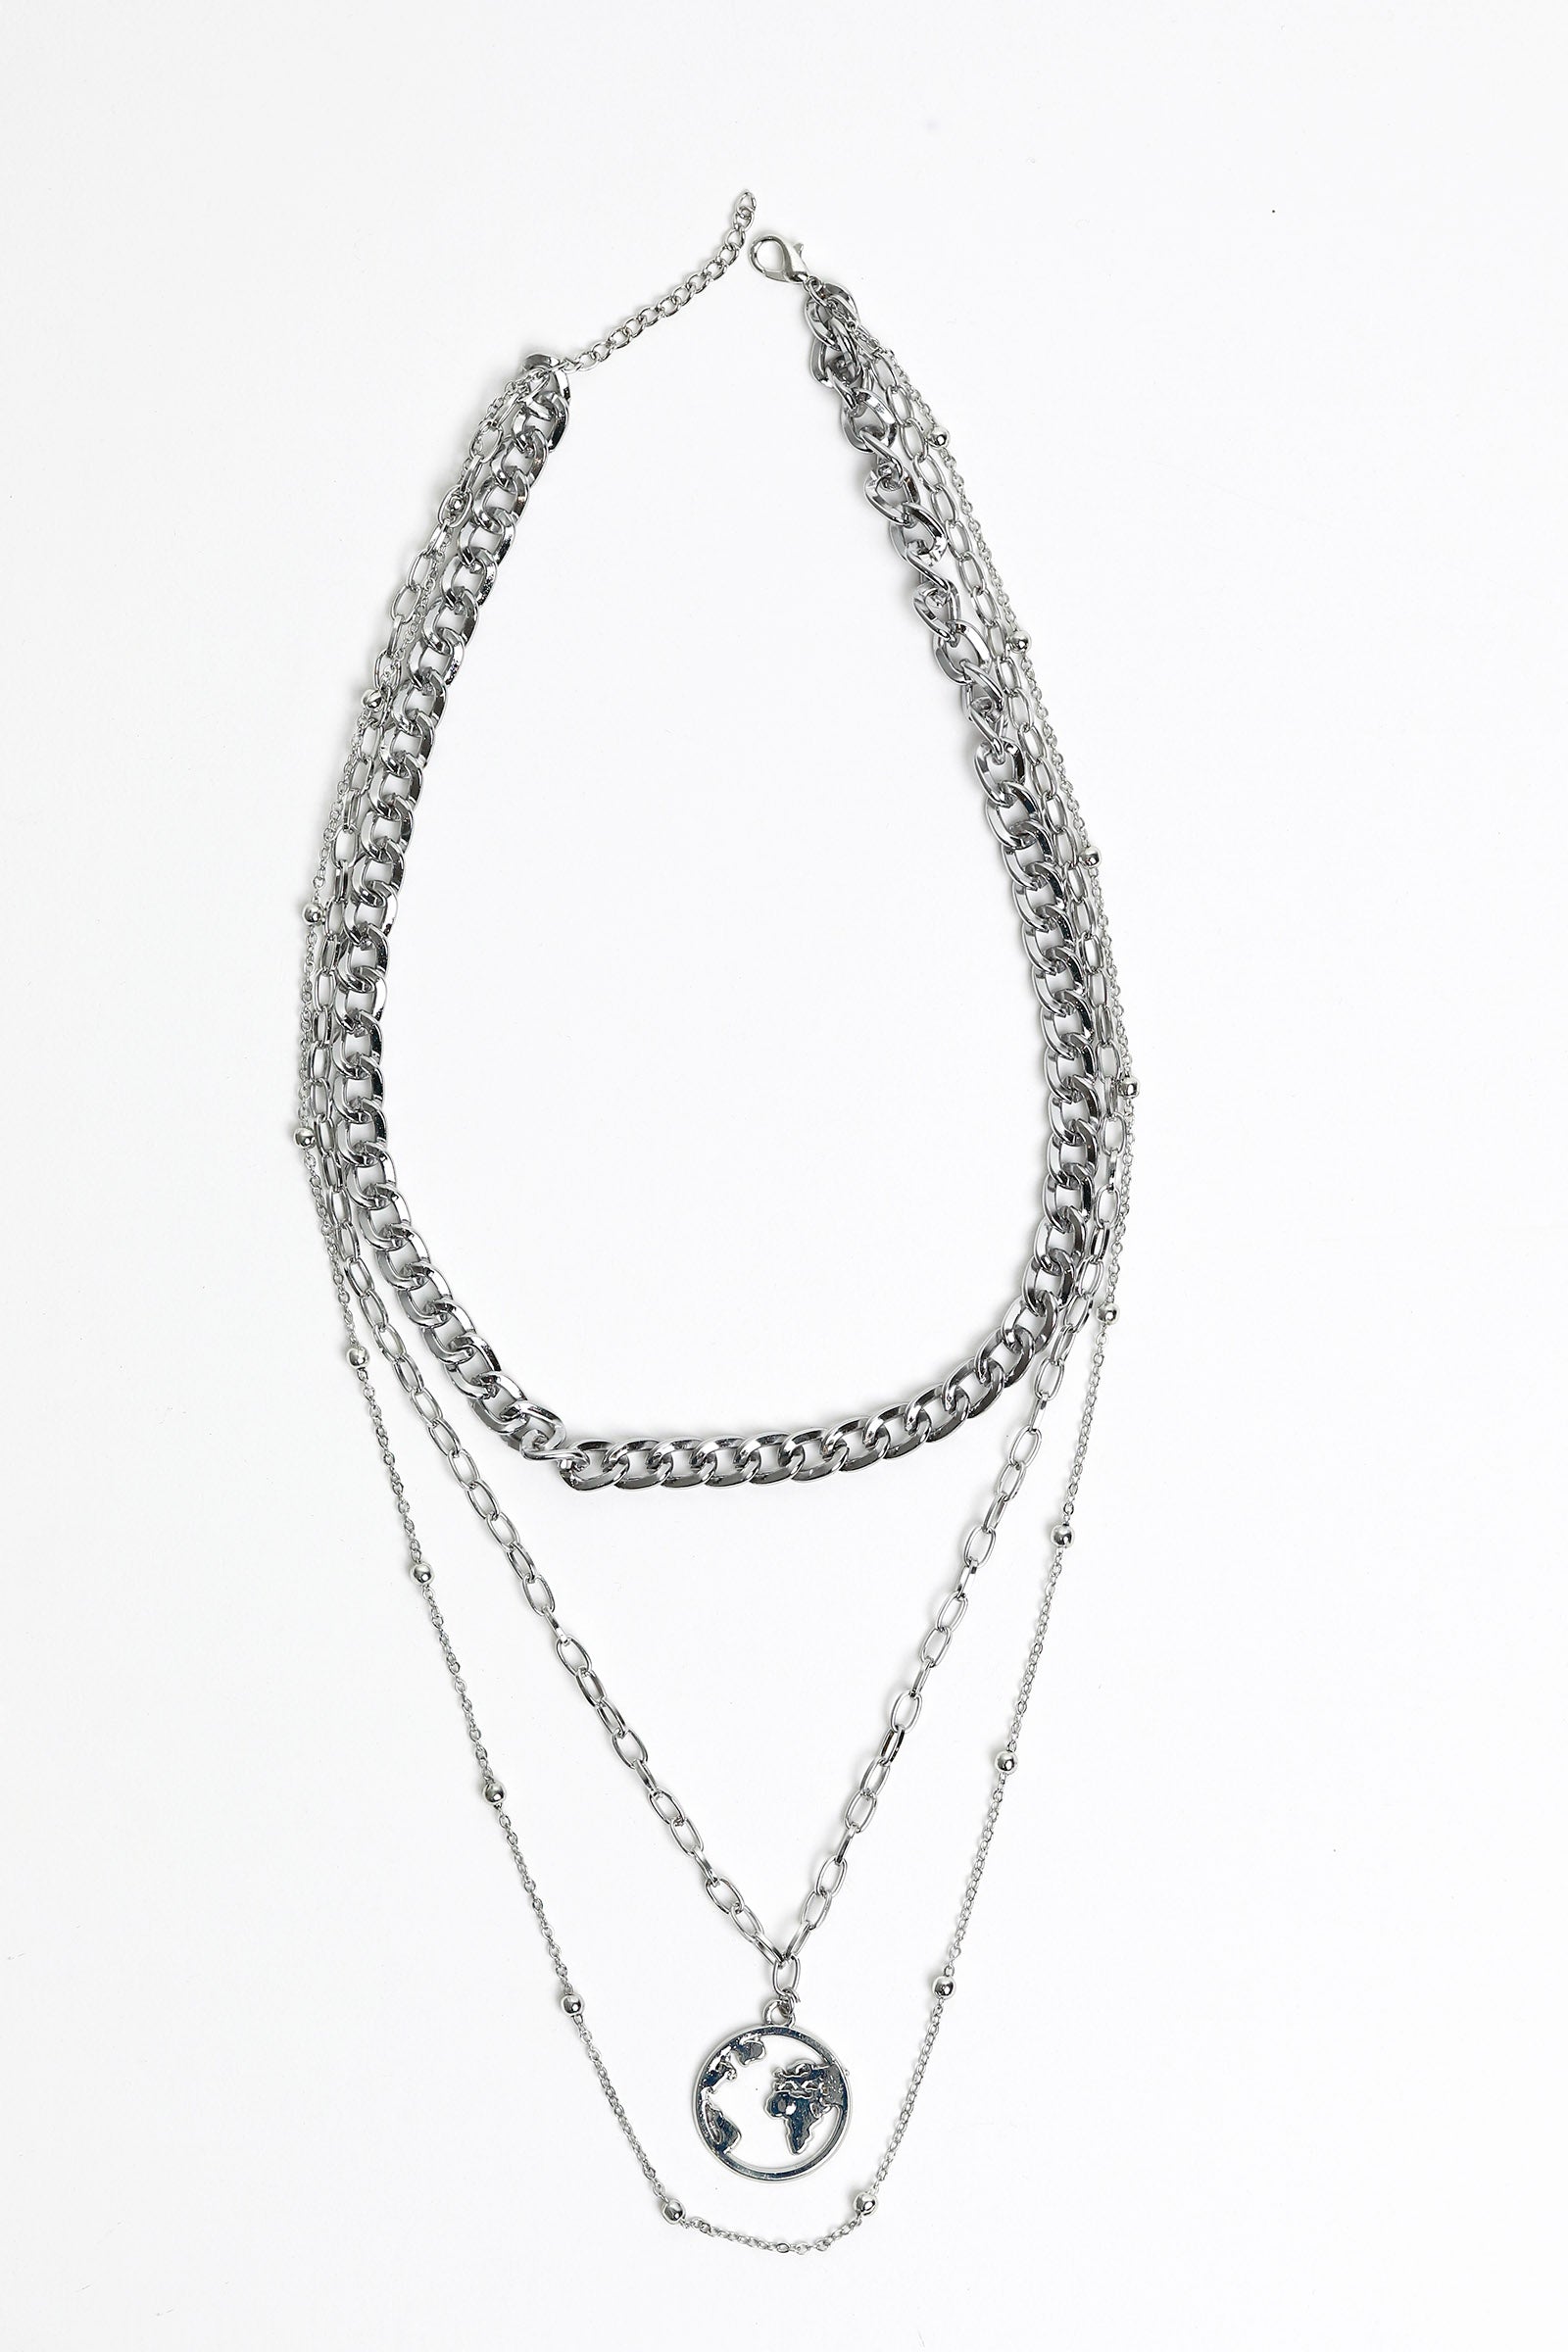 Tier Chain Necklace